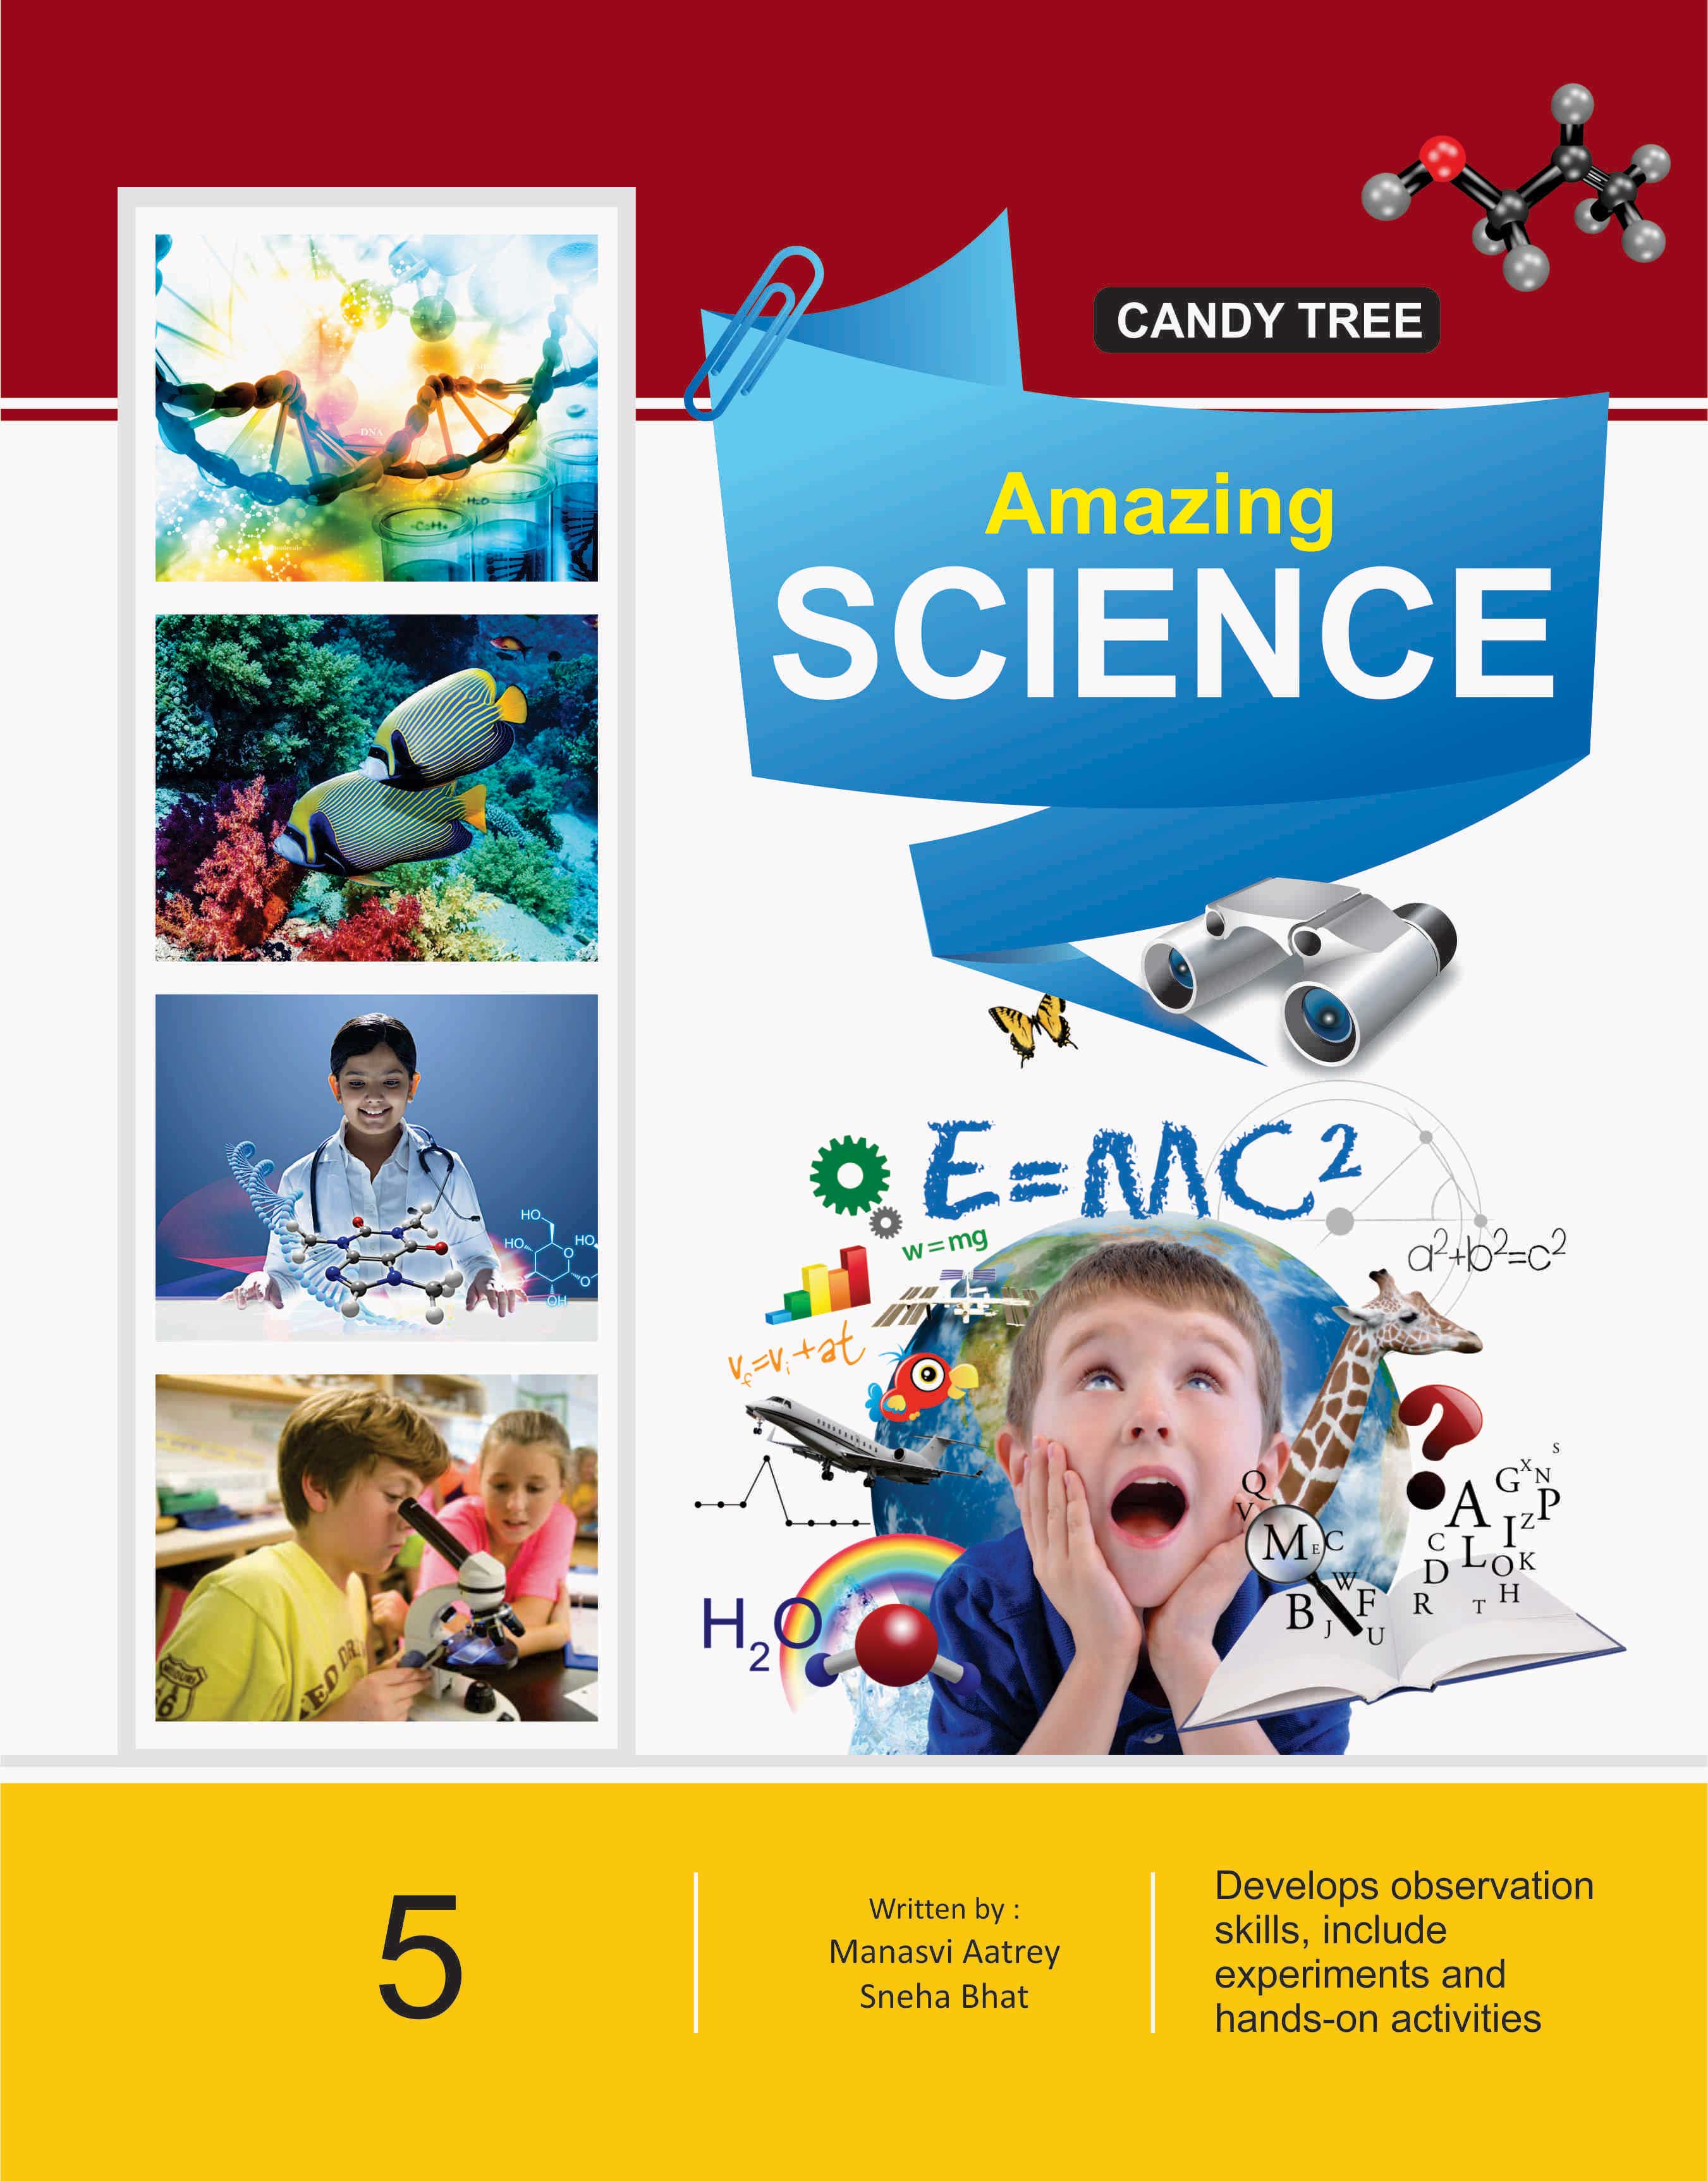 candy tree science